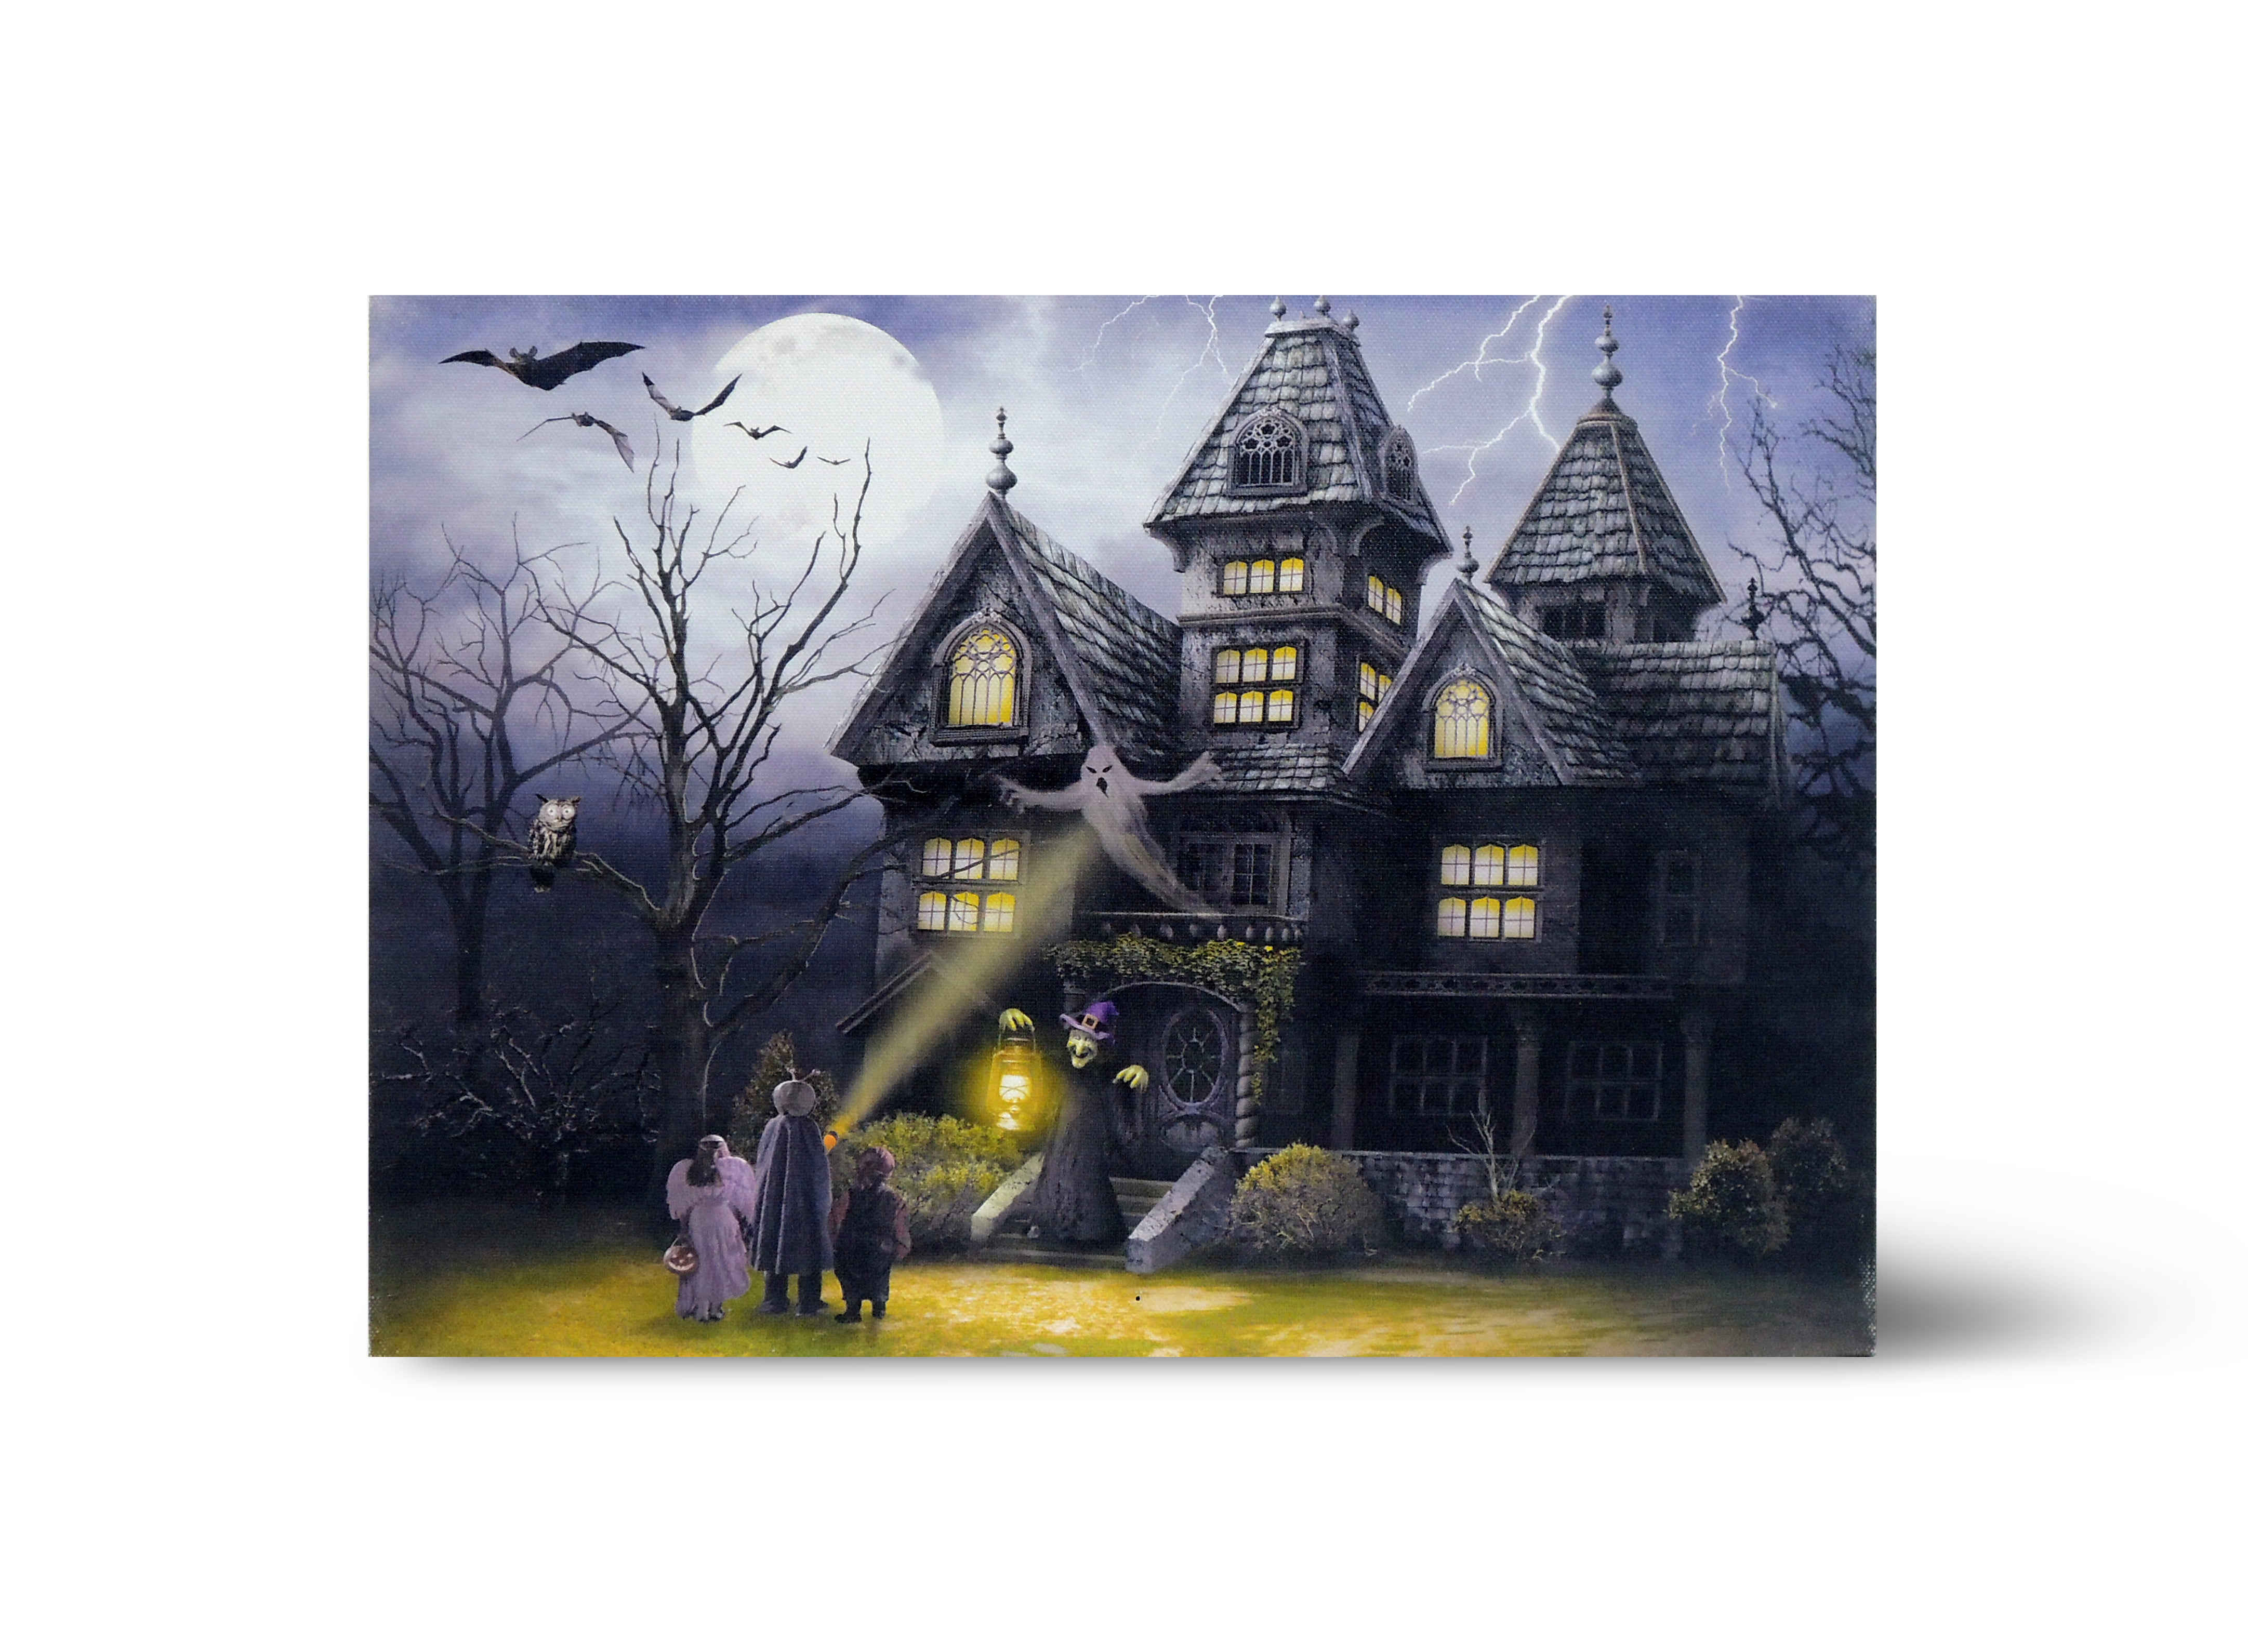 Haunted House Ideas For Teens